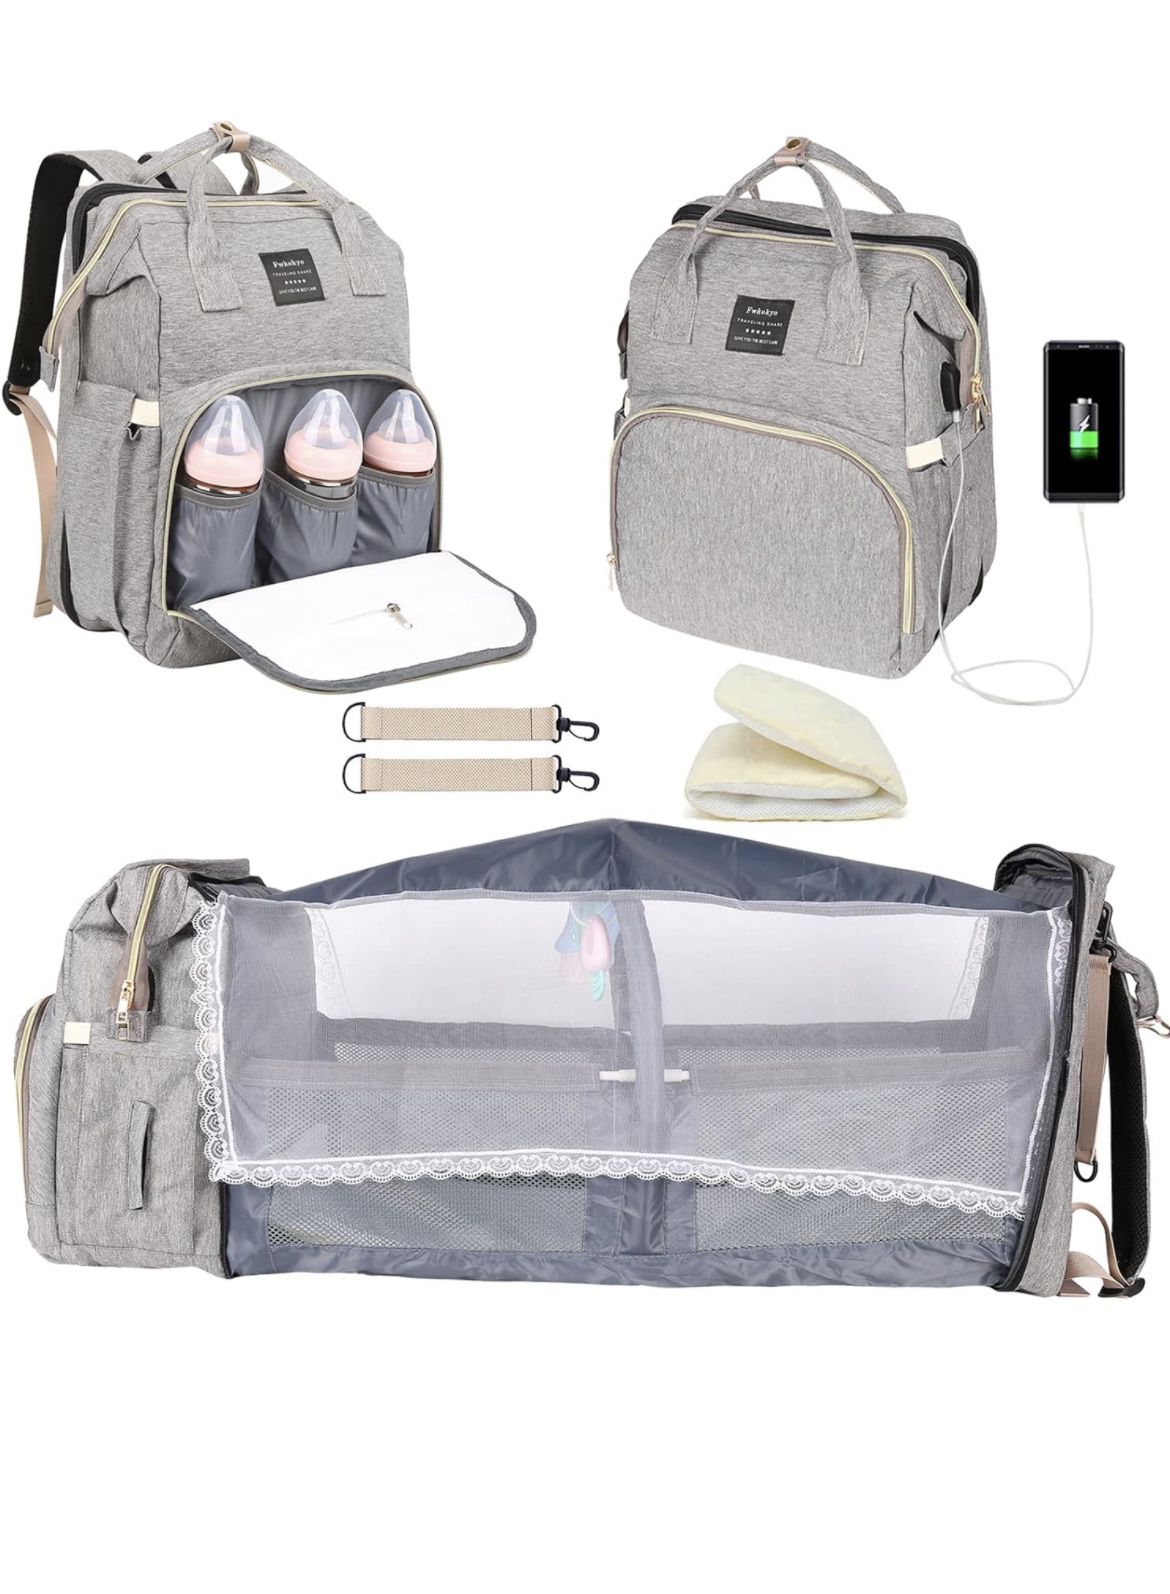 NEW* Diaper Bag/ Travel Changing Table 